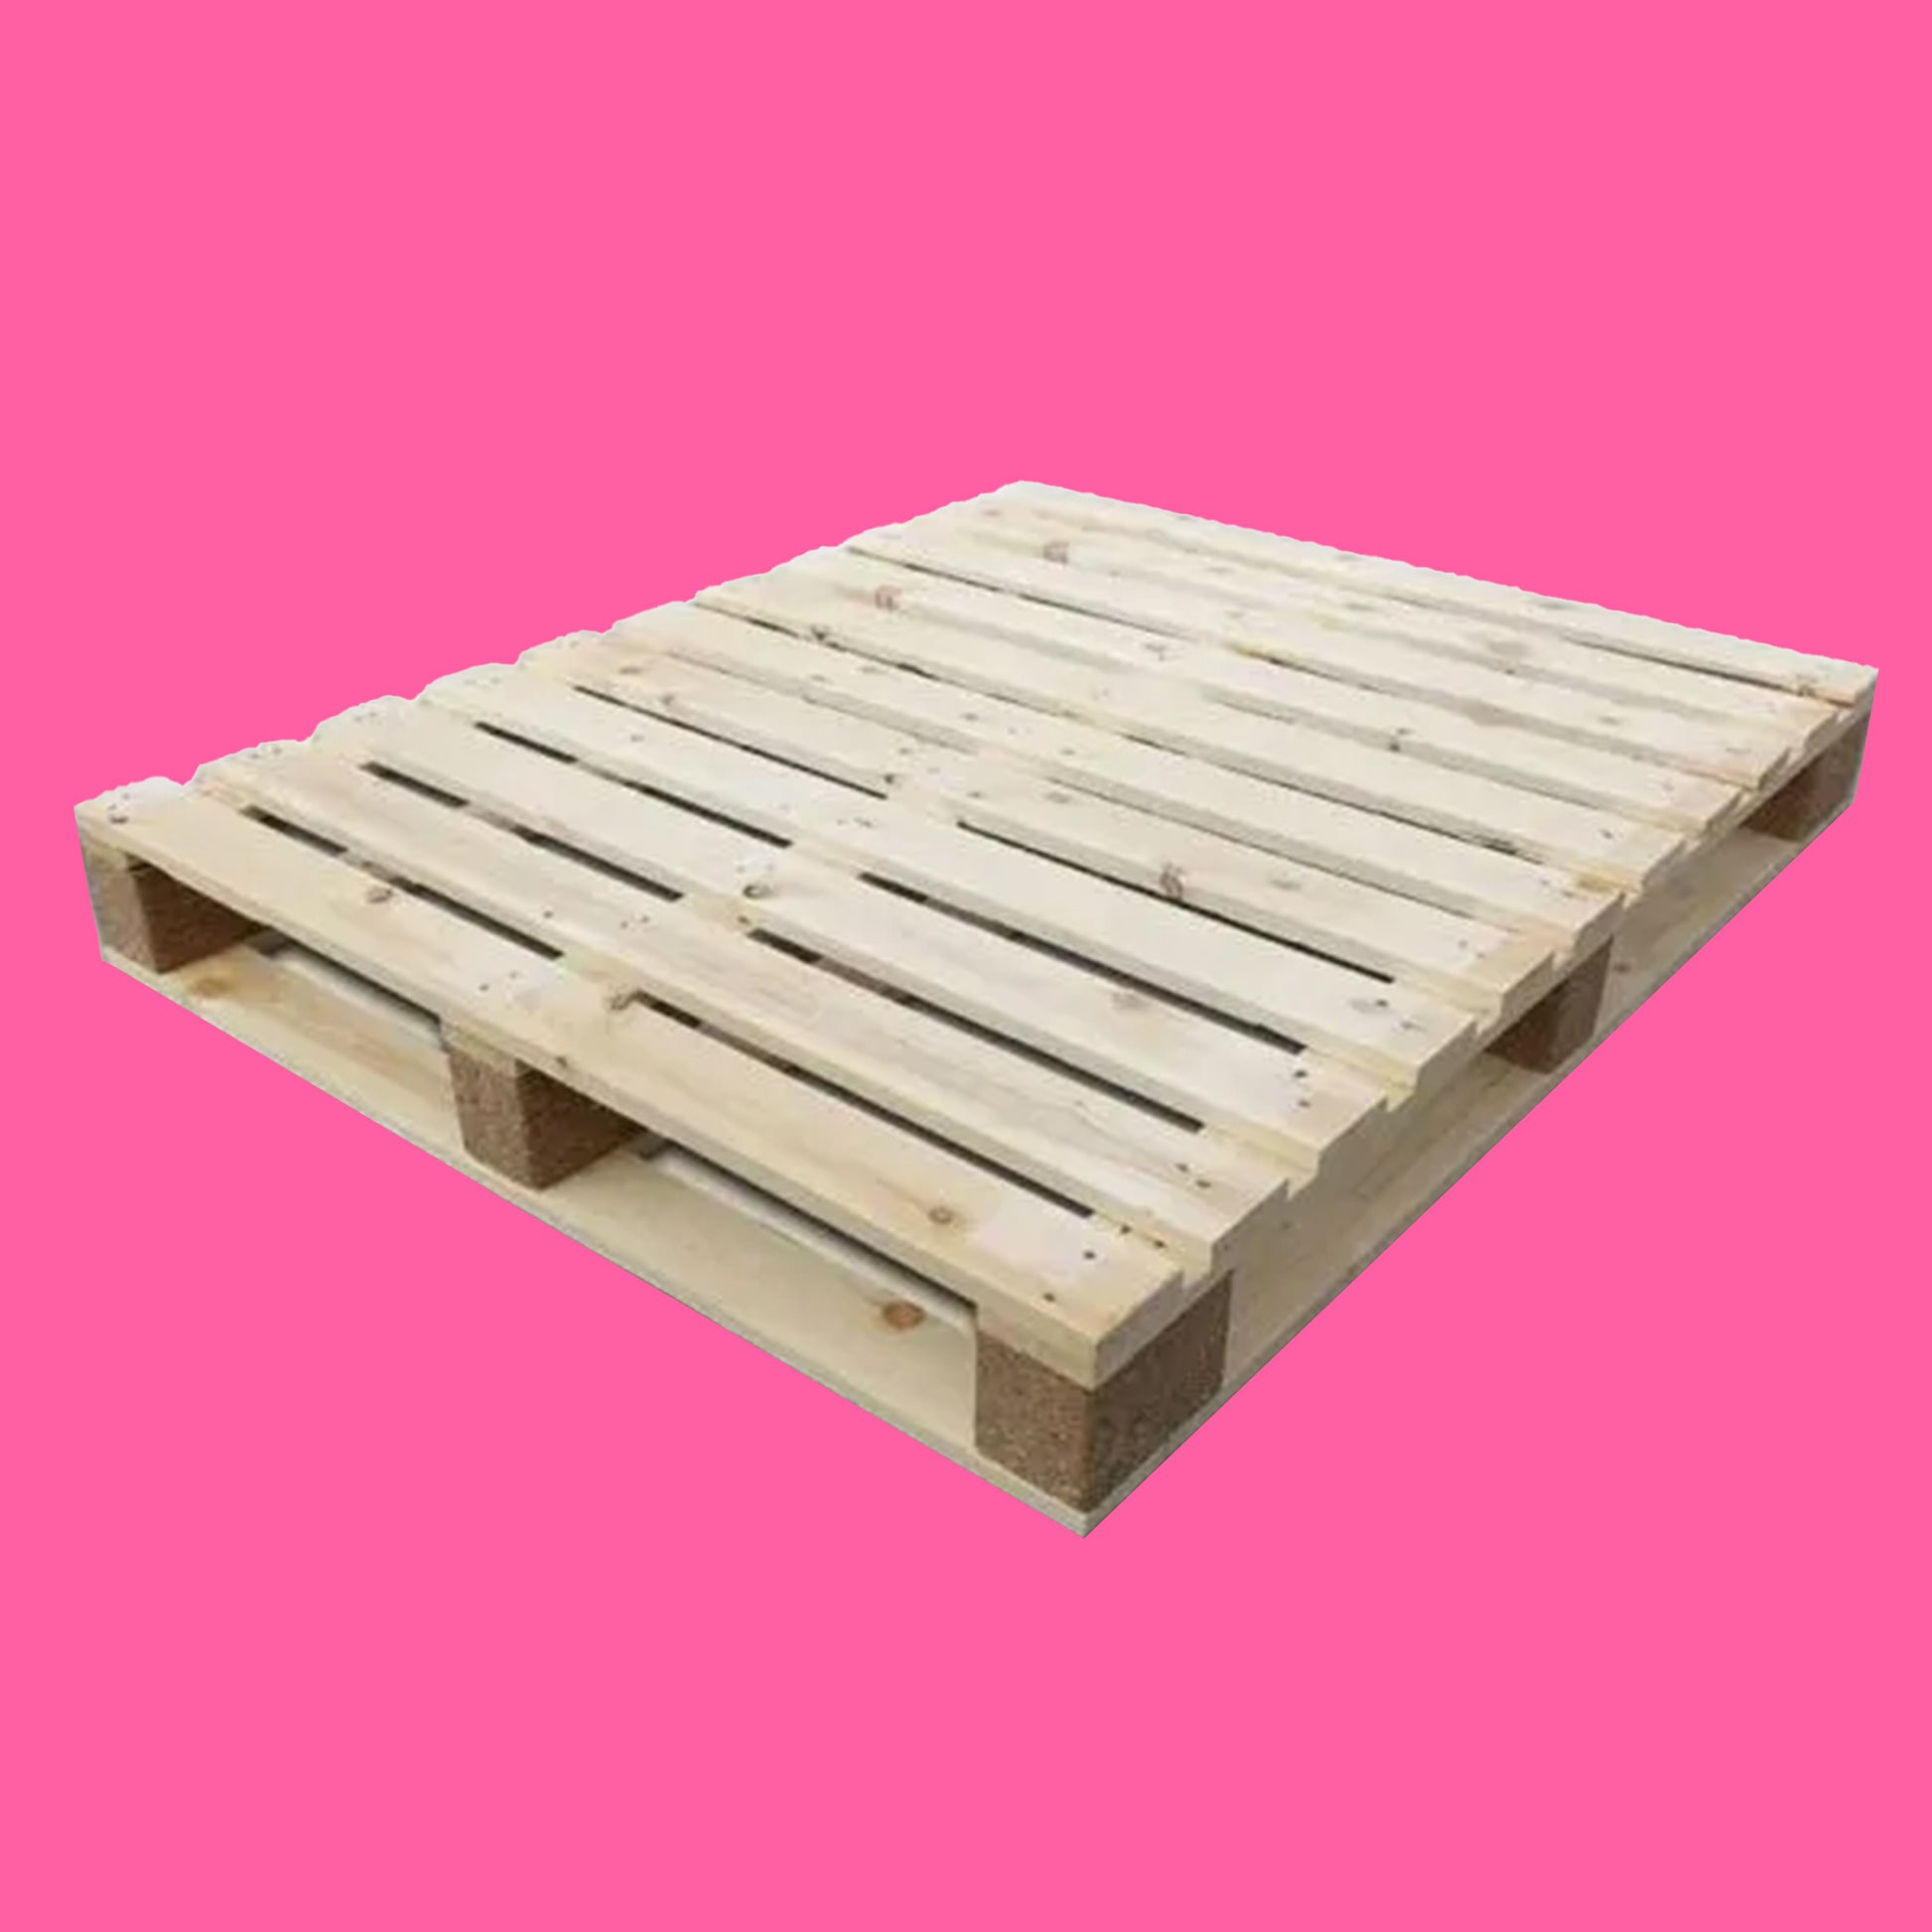 EPAL marked treated wooden pallet 1.2m long and 1m wide